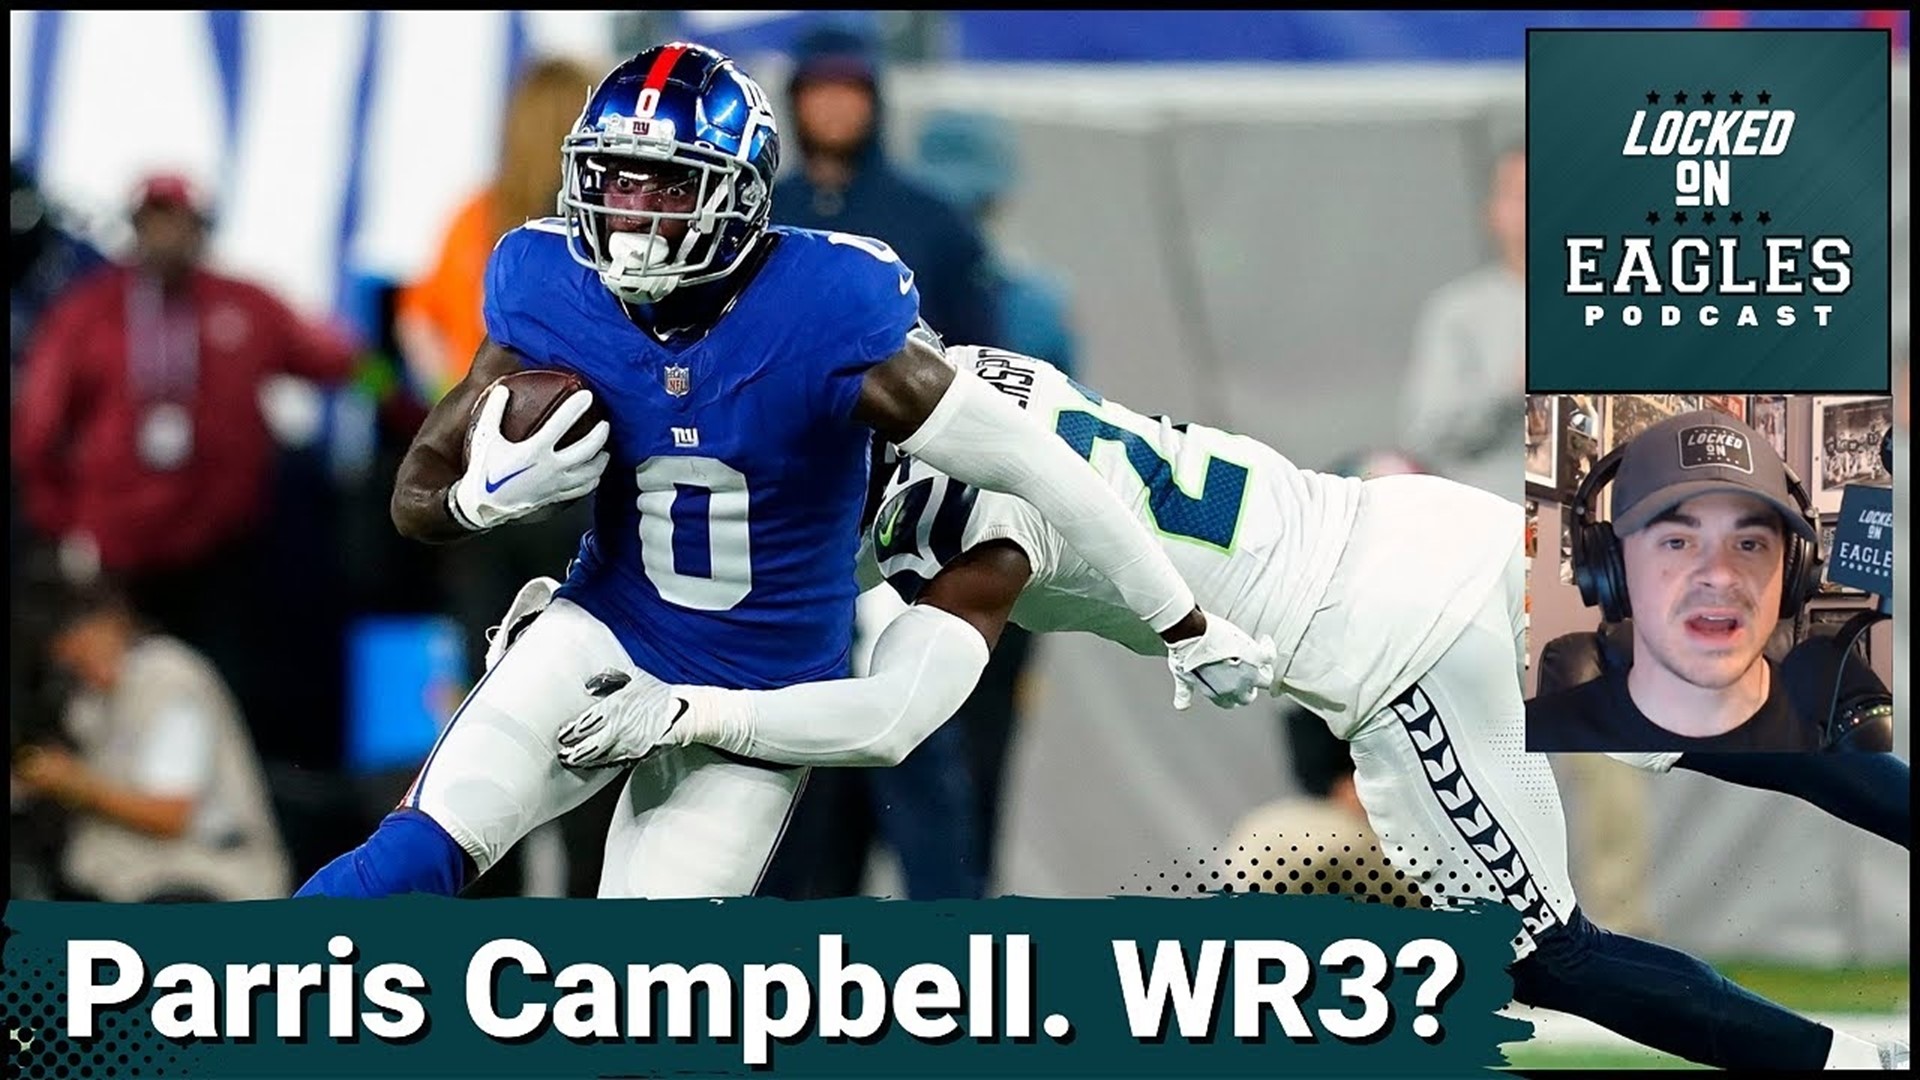 The Philadelphia Eagles signed Parris Campbell on Thursday. Will he be the new WR3? Can Campbell finally live up to his 2nd round label and utilize his 4.31 speed?